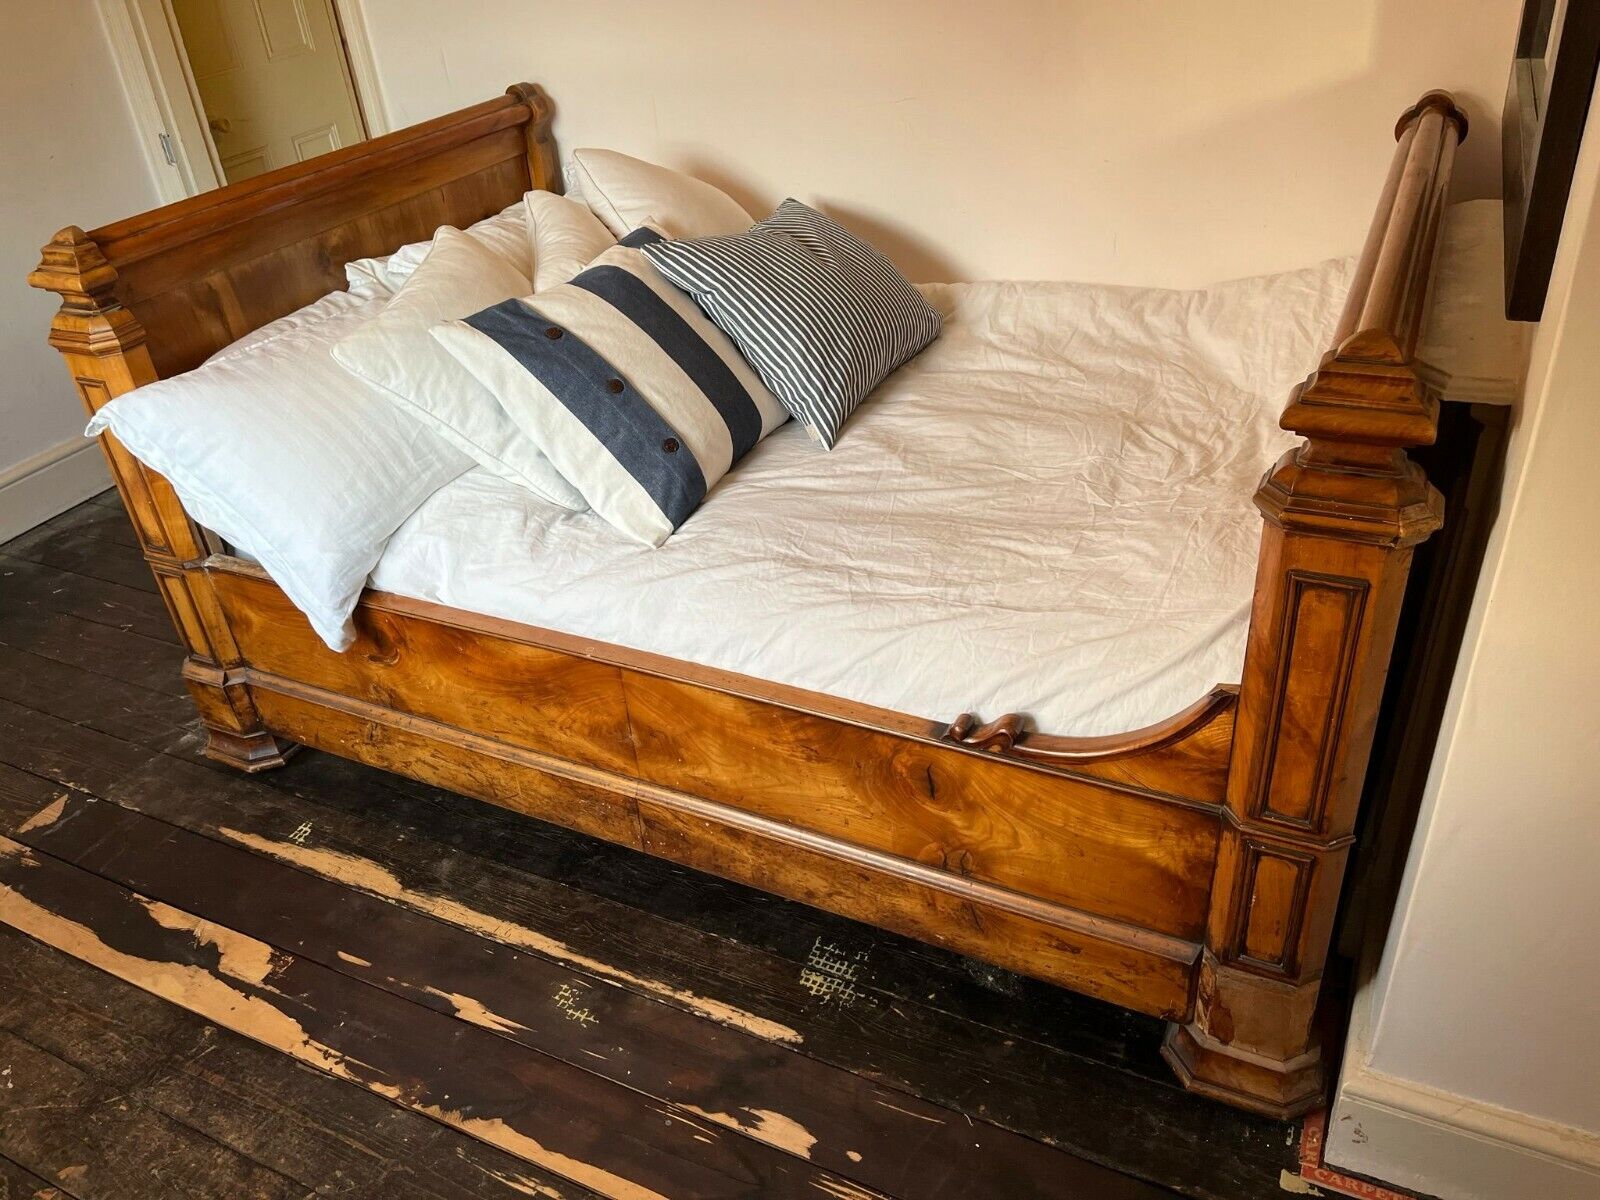 Buy ORNATE ANTIQUE SMALL DOUBLE BED AND FRAME